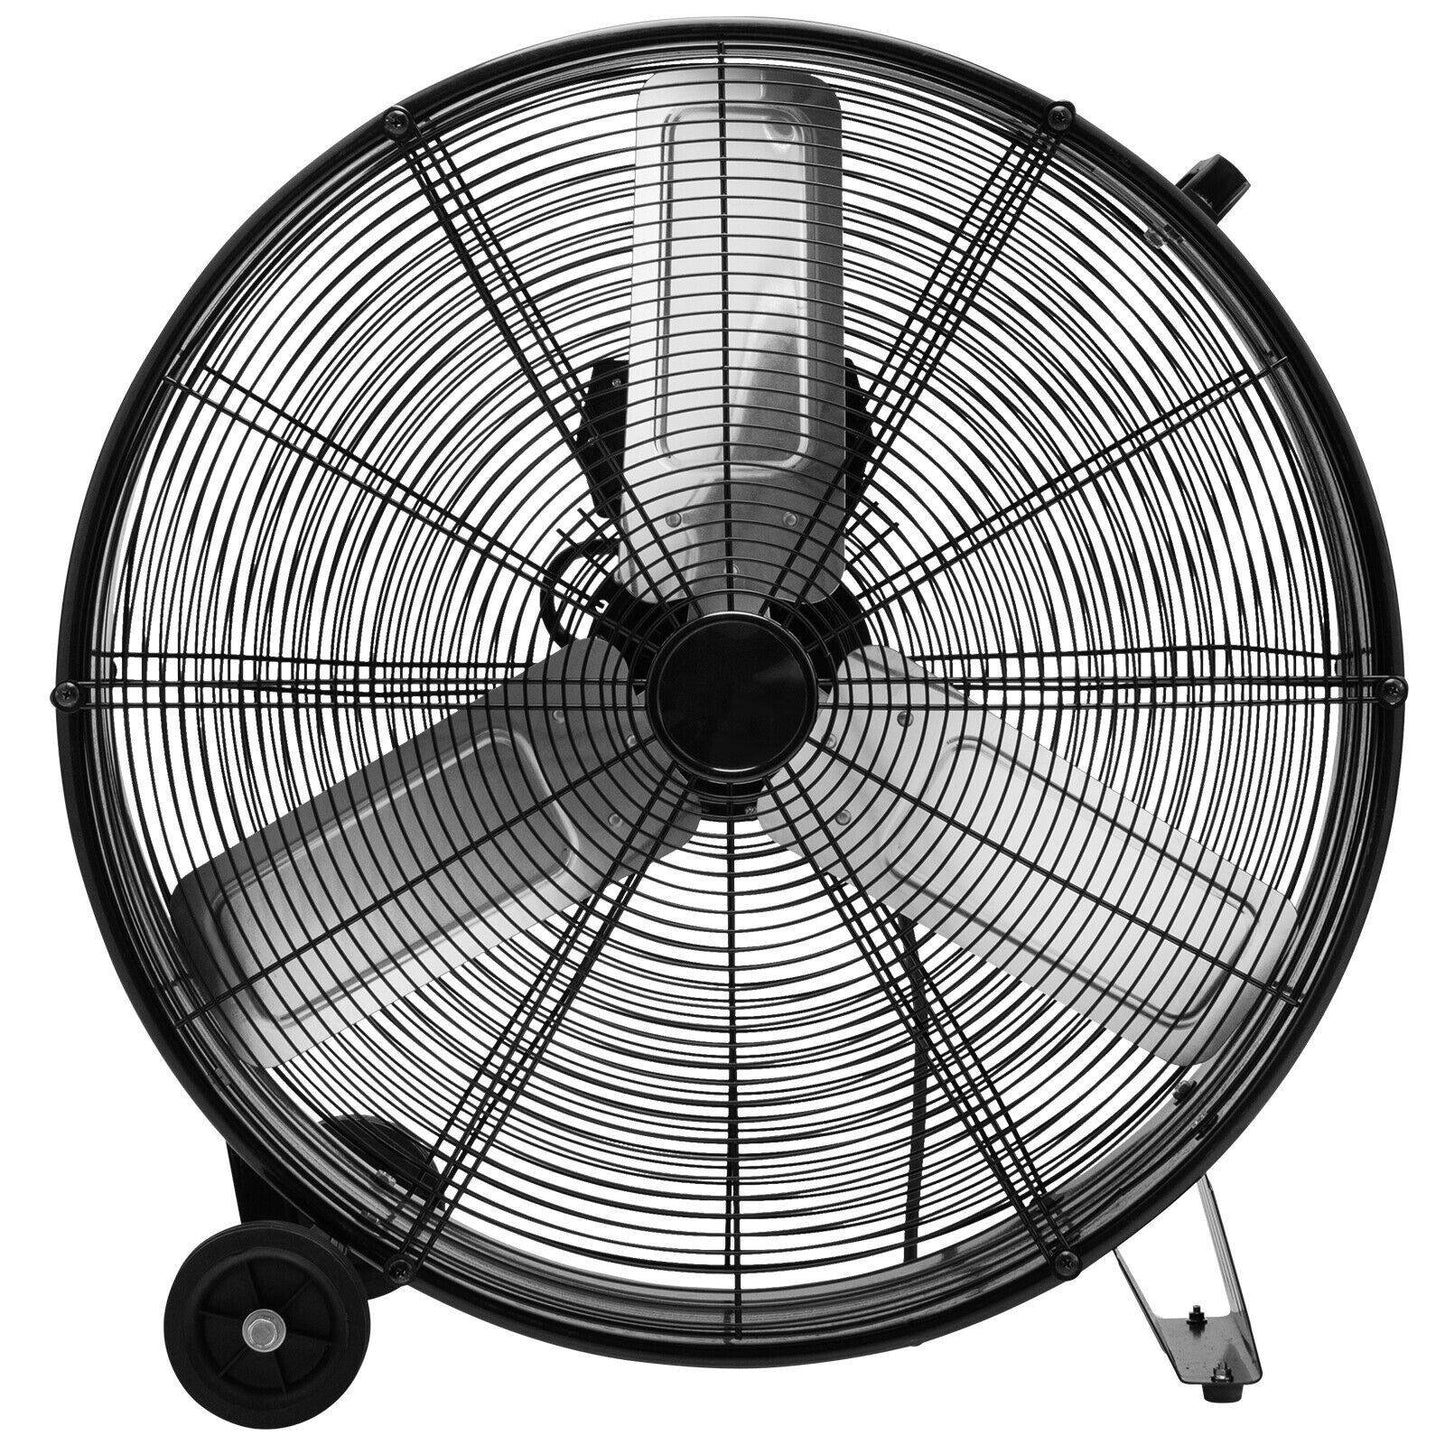 3-Speed 24 Inch Industrial Drum Fan with Aluminum Blades, Black